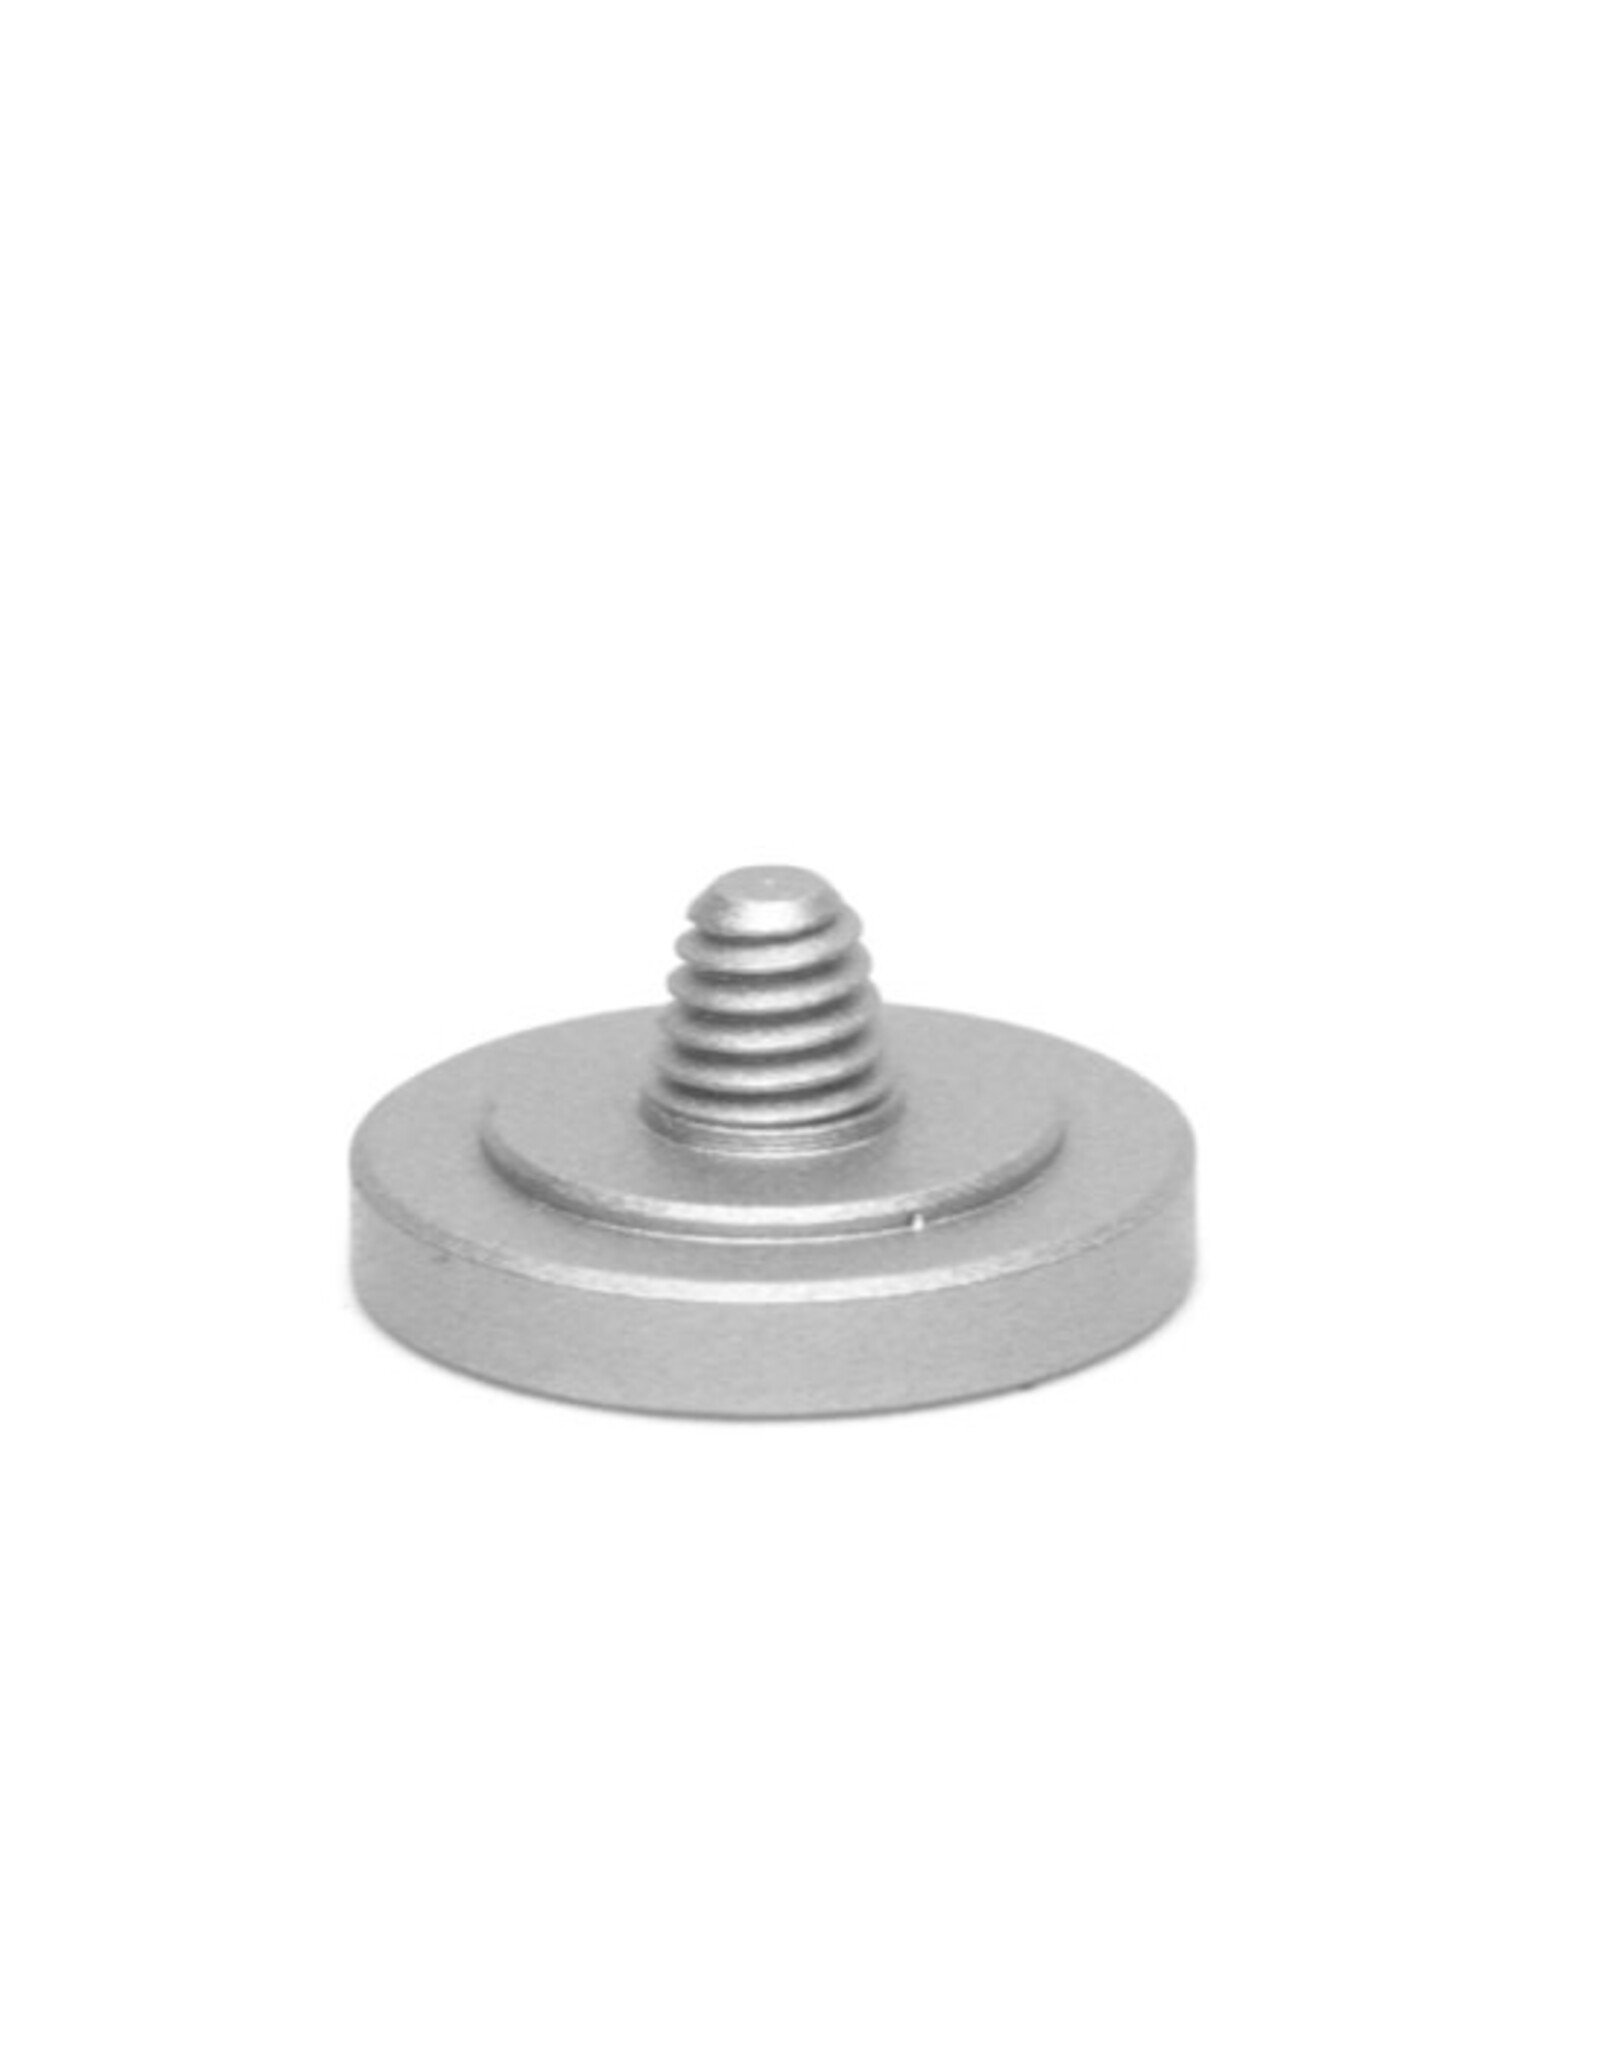 Metal Shutter Soft Release Button Silver Concave